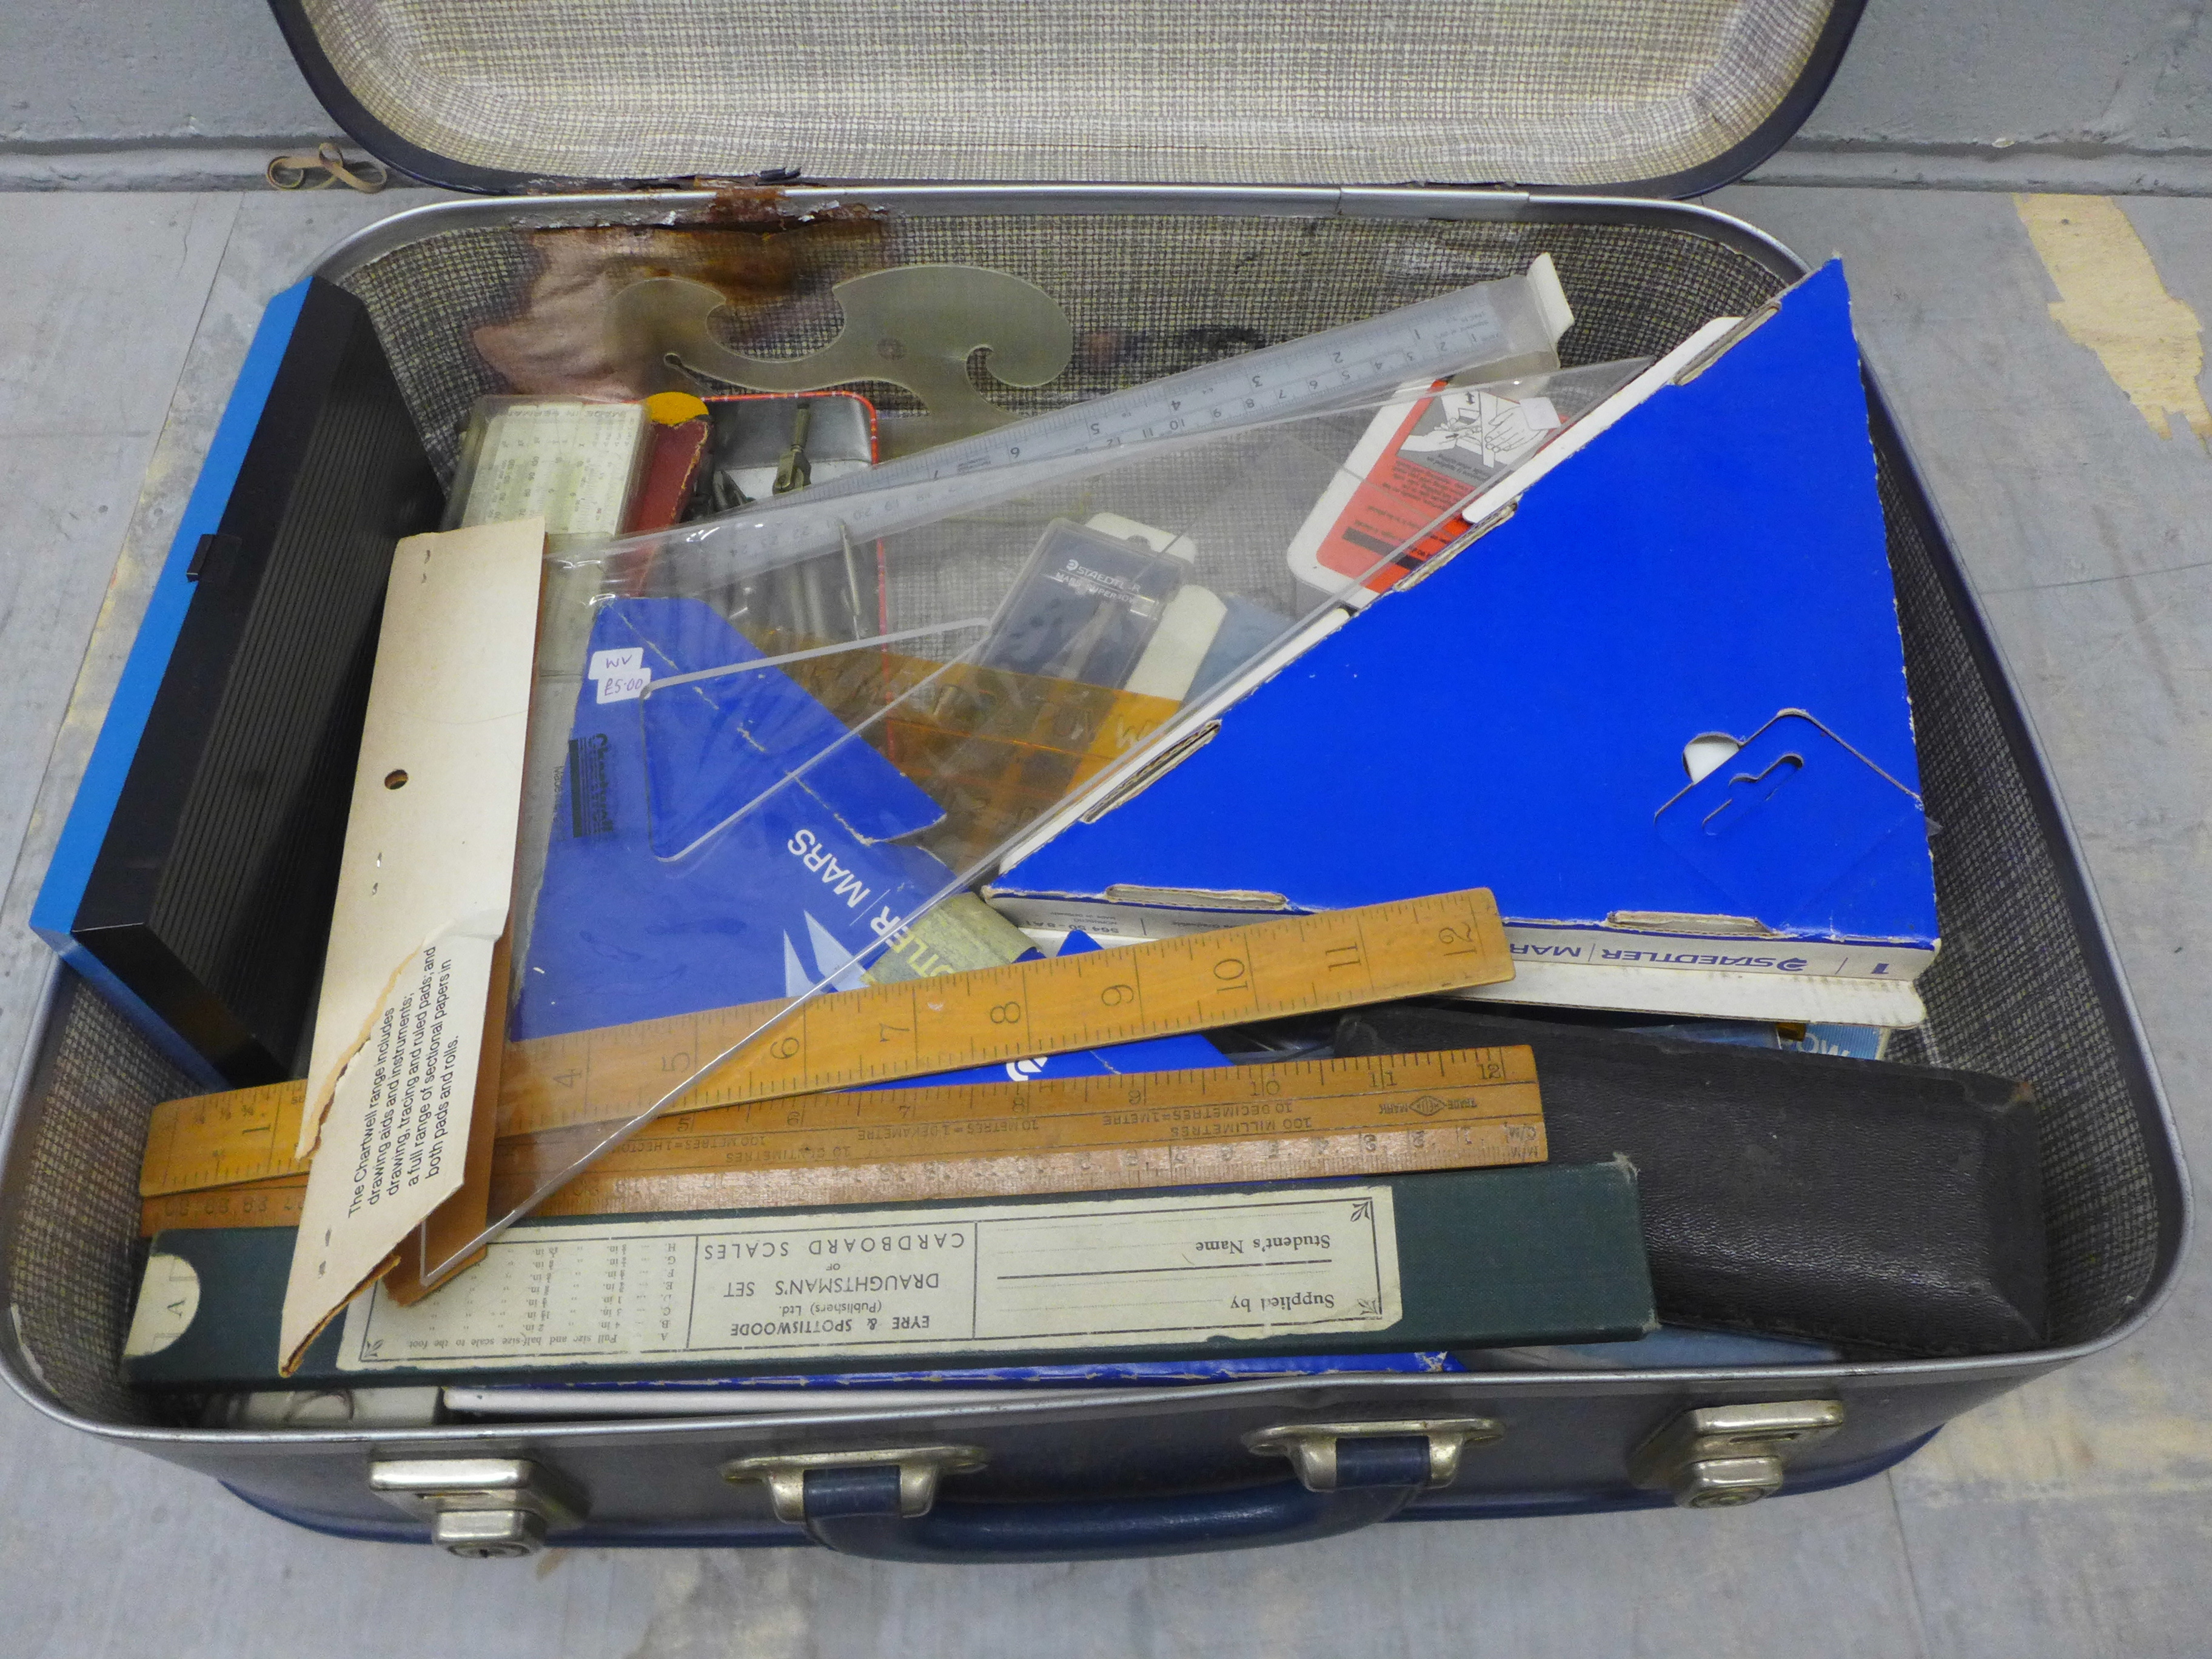 A collection of items for technical drawing (drafting) including rulers, boxed vintage compass sets, - Image 3 of 5